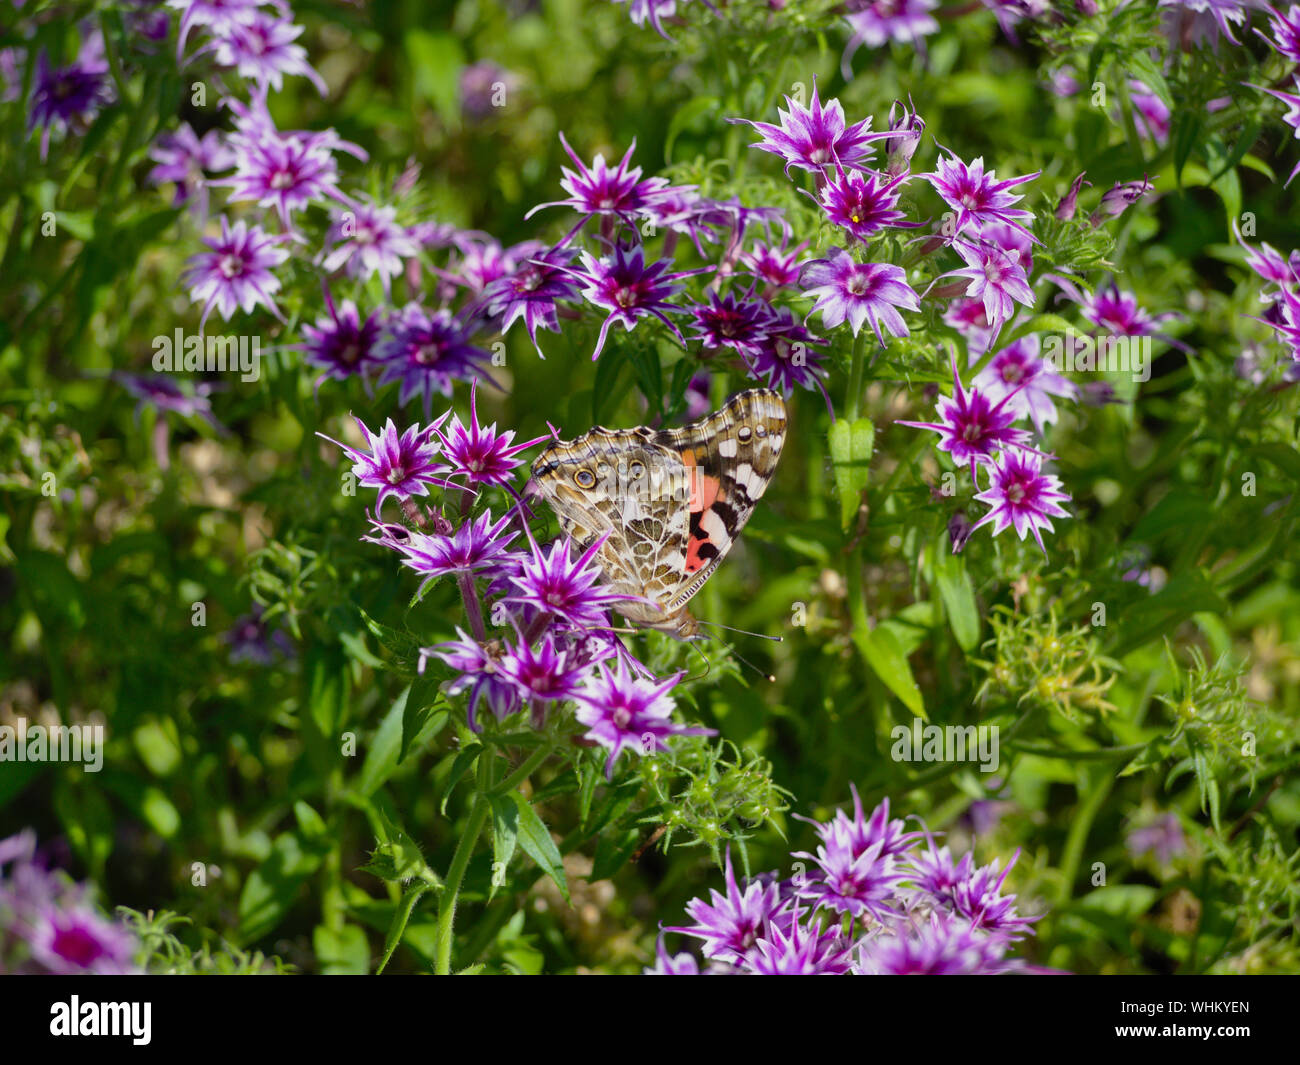 A Painted lady (Vanessa cardui) butterfly on a purple and white Phlox Twinkle Star Flower in Commissioner's Park,  Ottawa, Ontario, Canada. Stock Photo